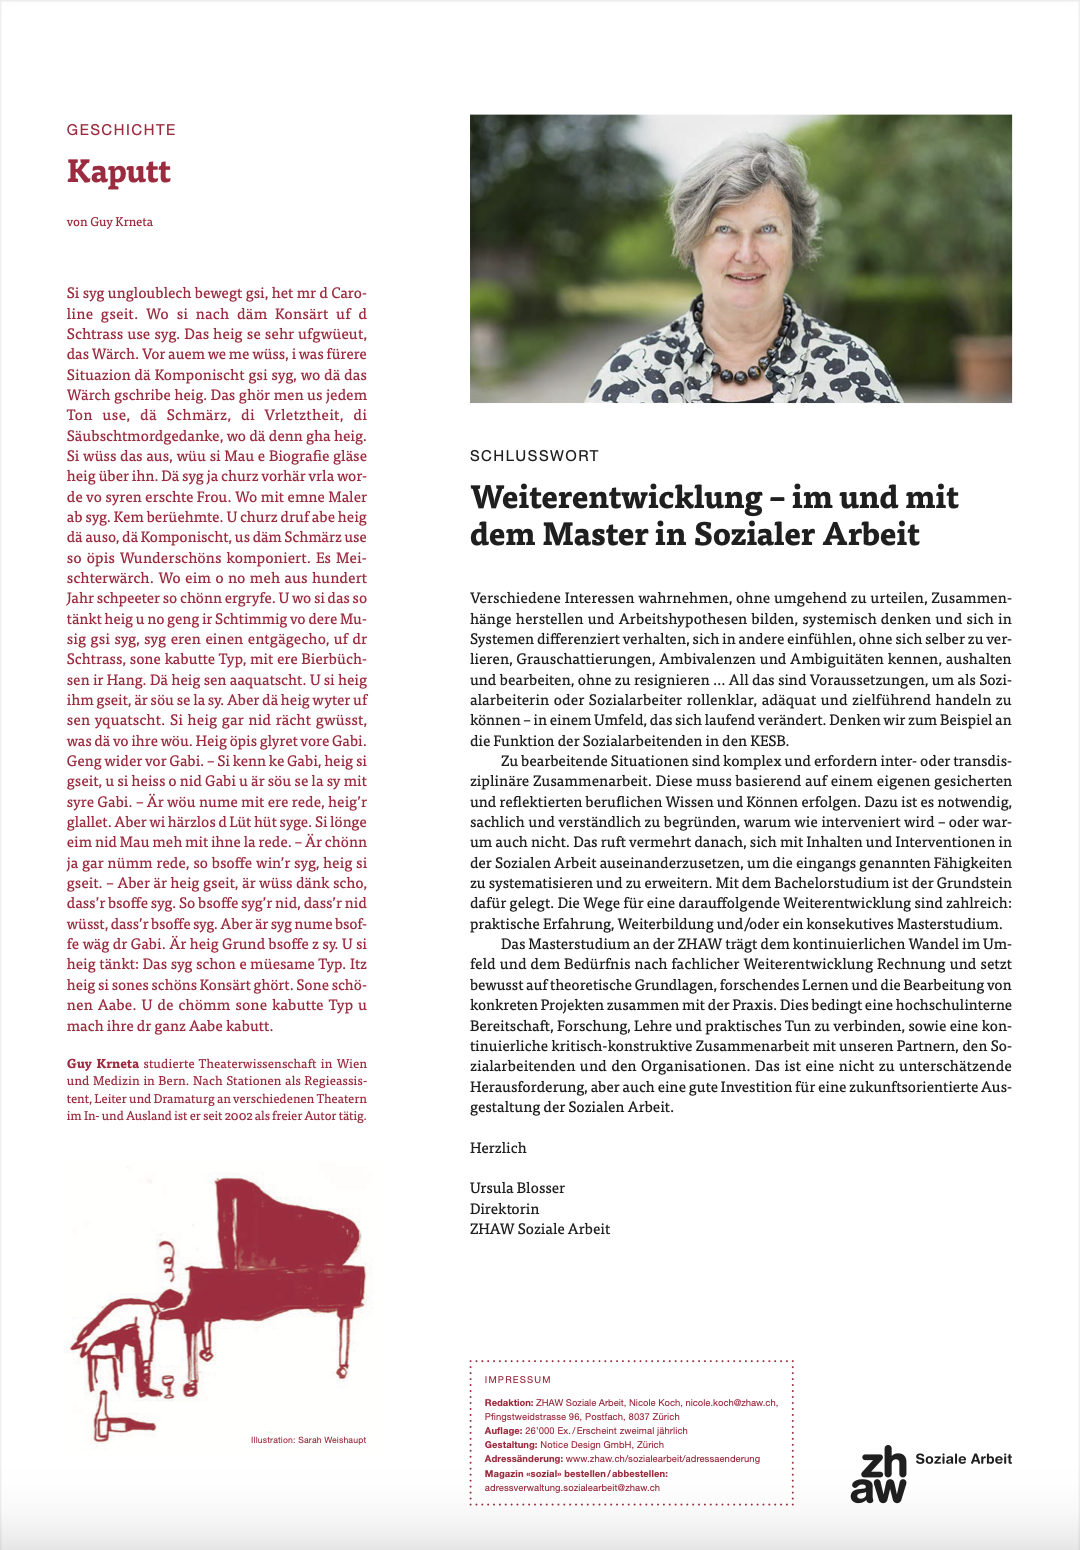 https://www.sarahweishaupt.ch/media/pages/home/magazin-zhaw-sozial/11e9909c36-1681224862/sozial_1_5.png